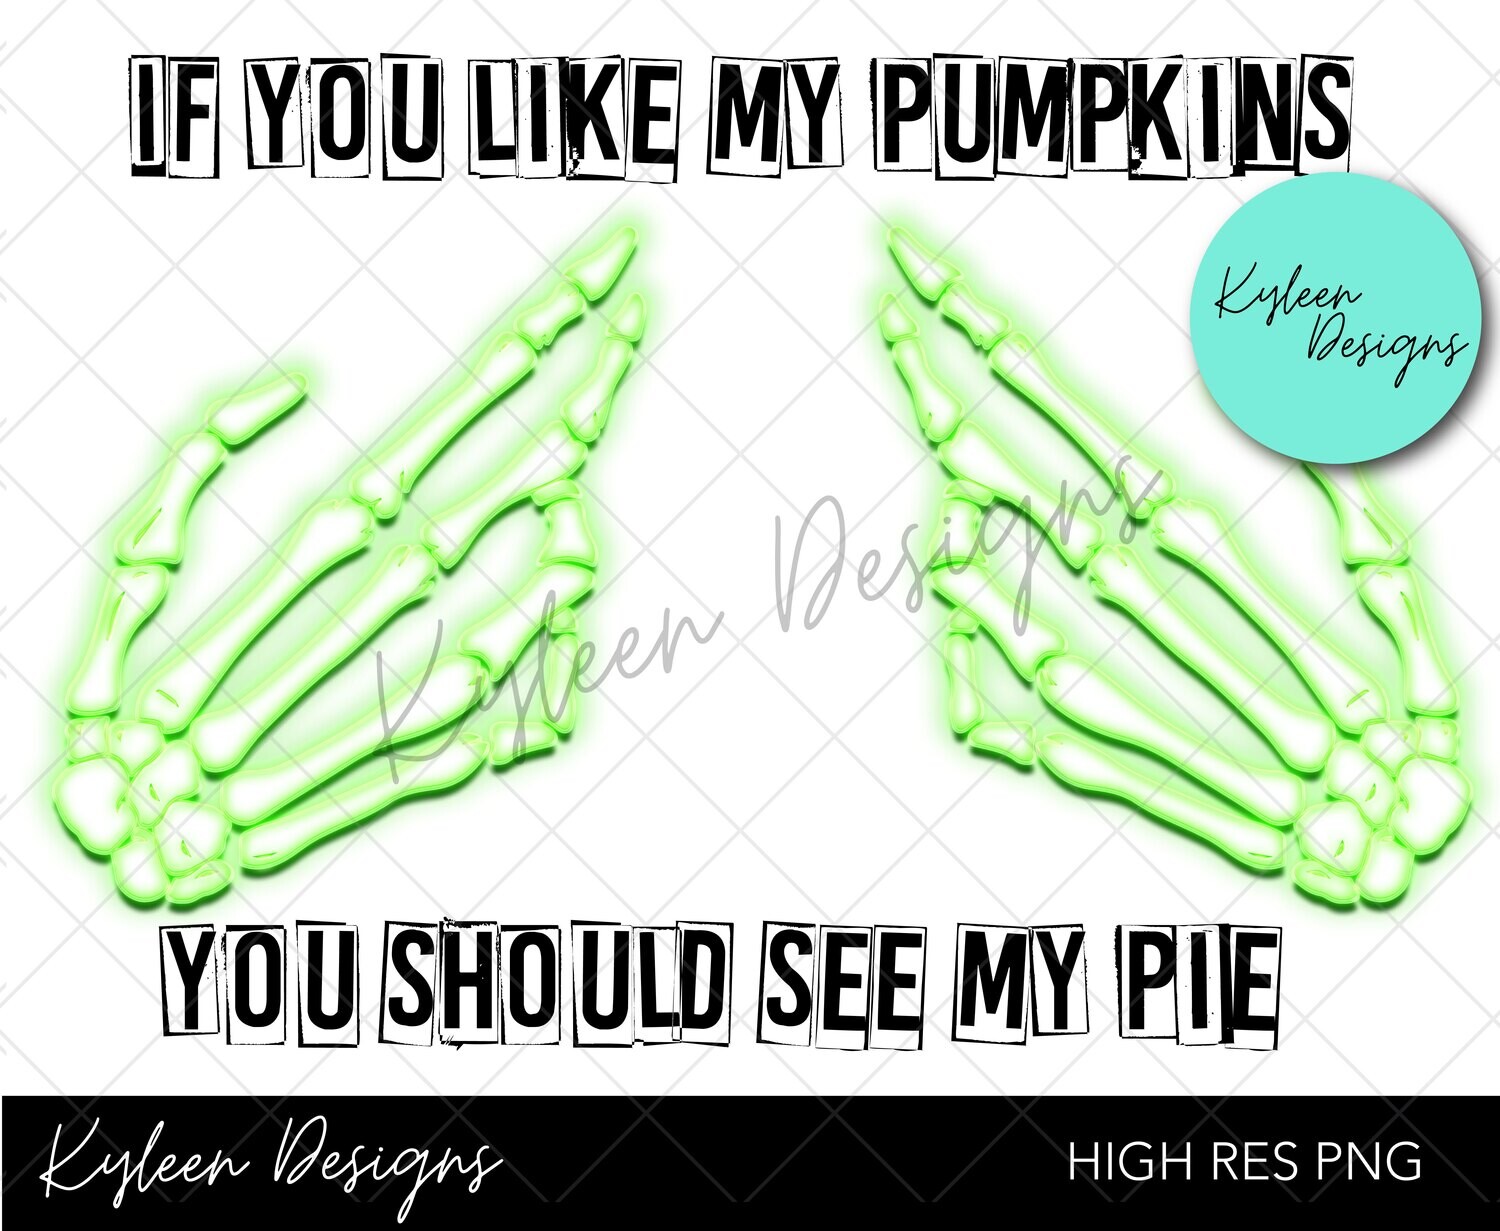 If you like my pumpkins High res PNG digital files- 2 versions included